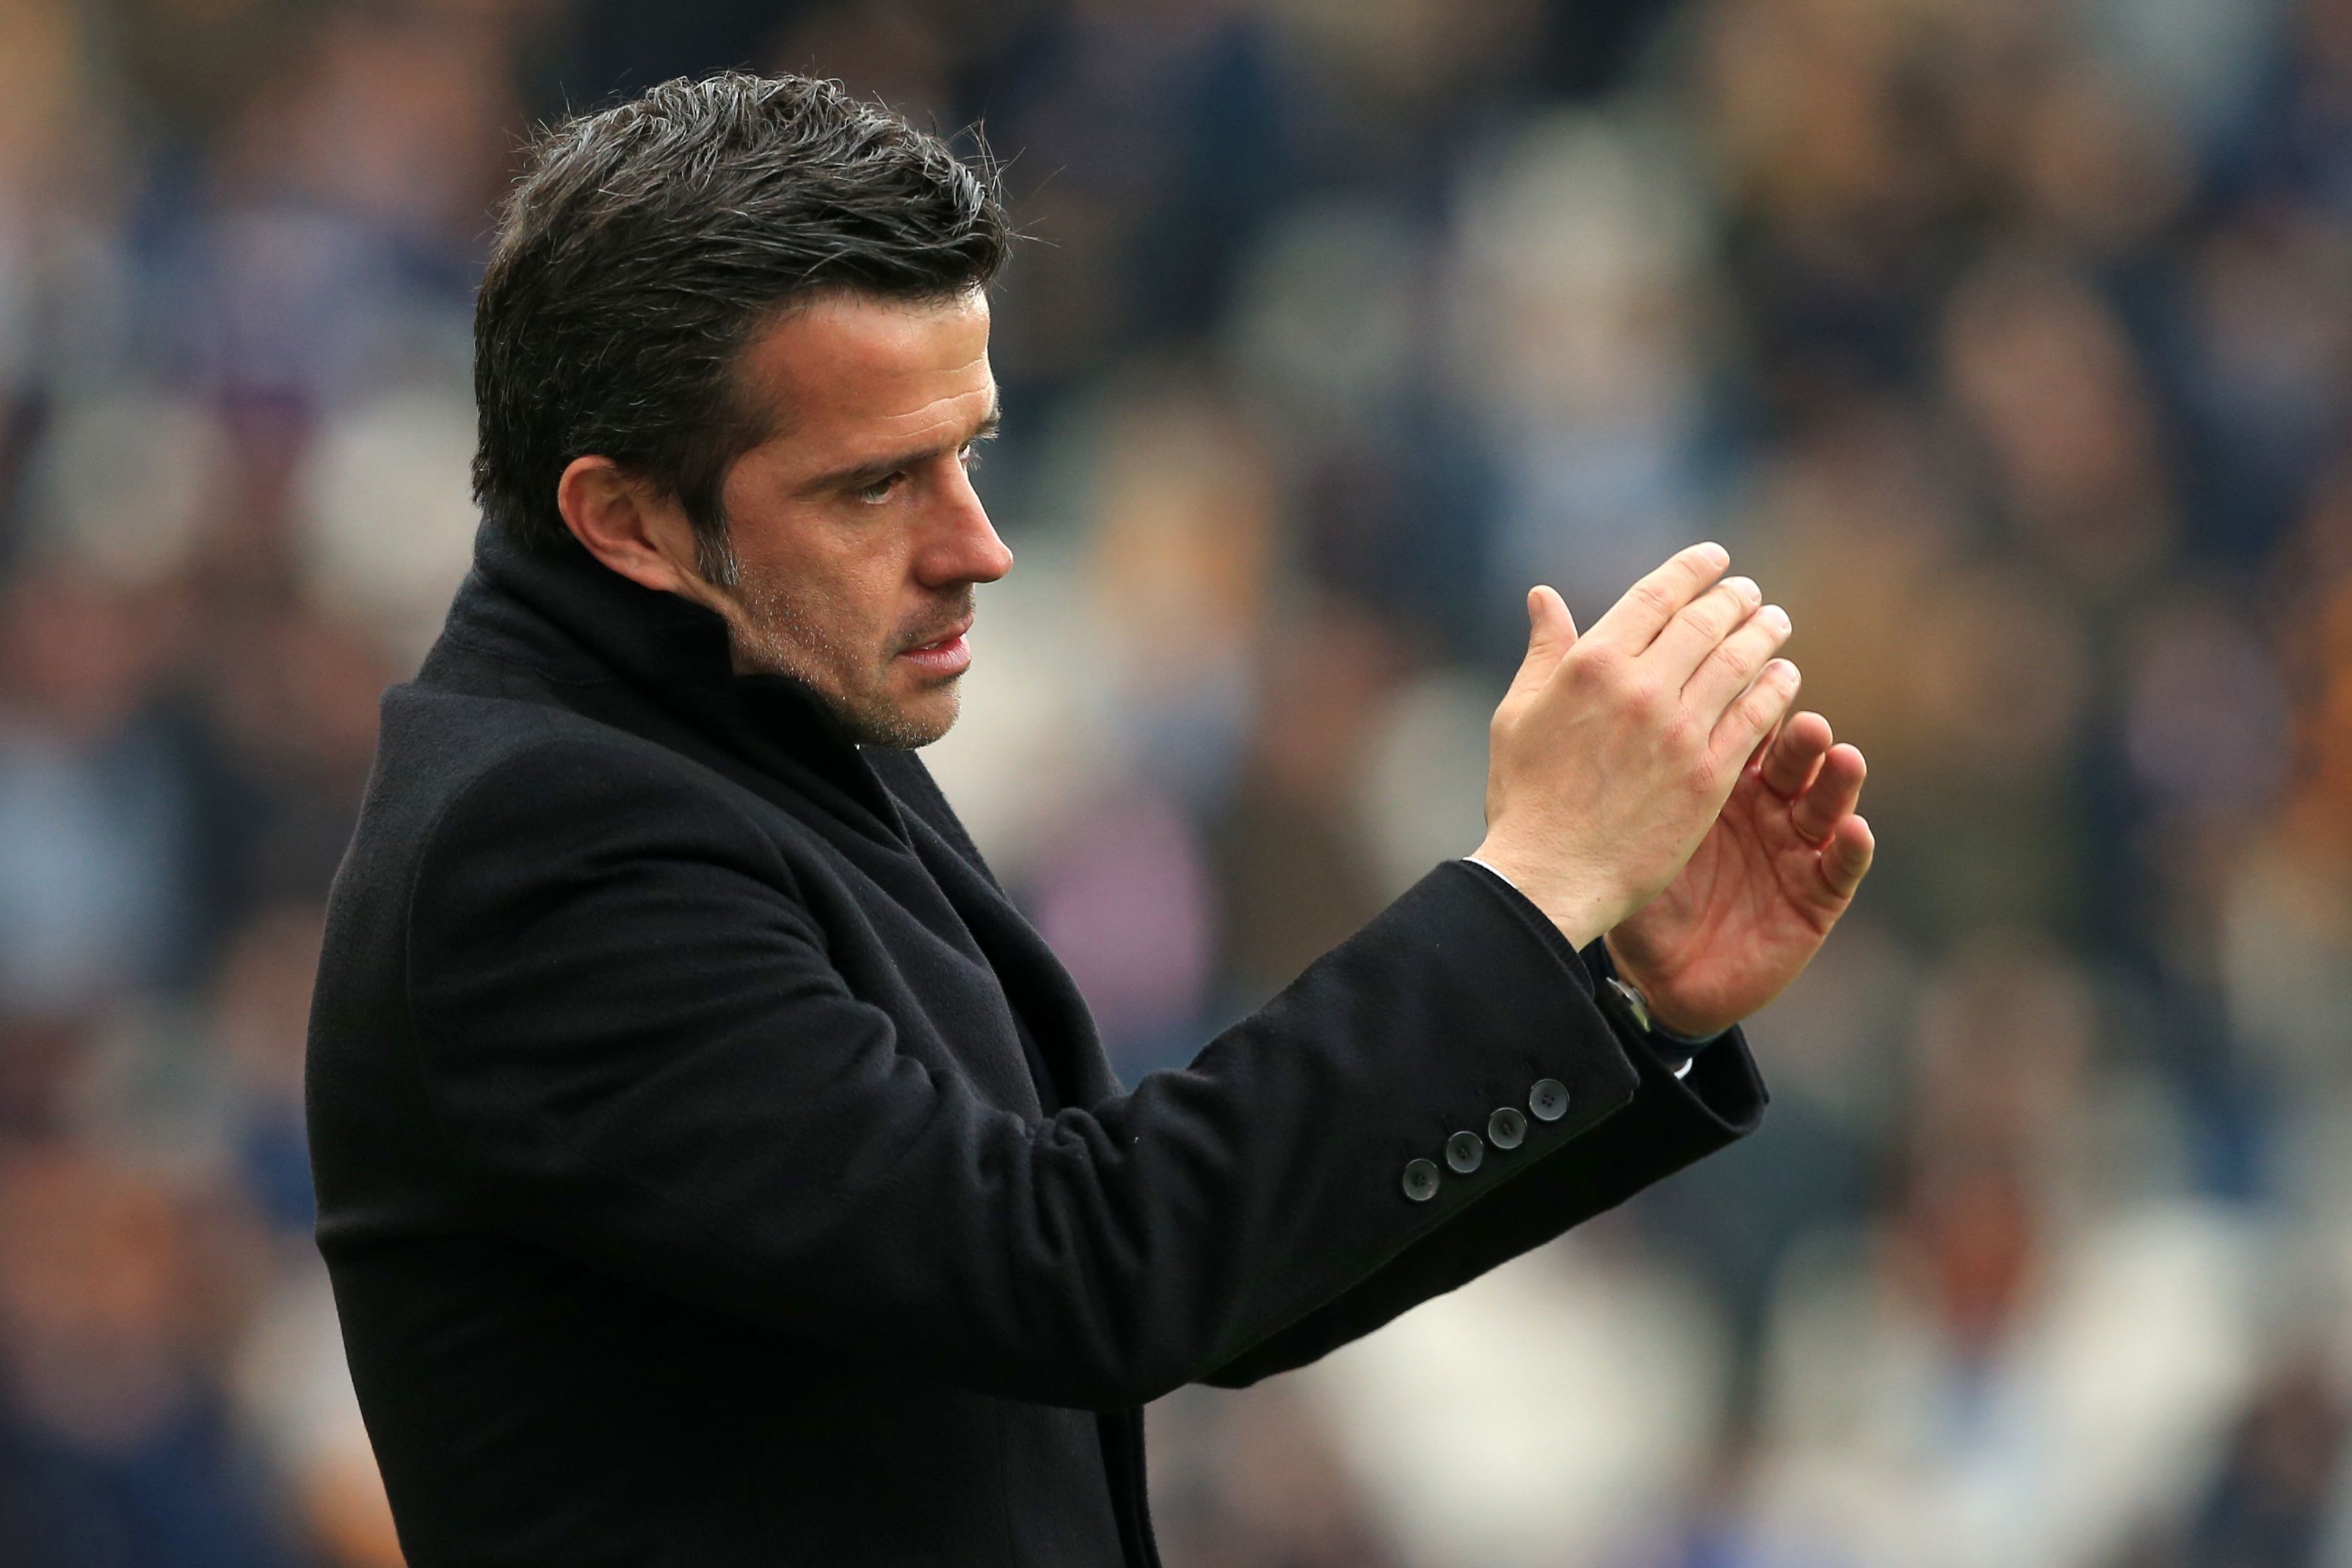 Hull City manager Marco Silva has led a massive turnaround at the club, but will his side run out of steam? Photo: AFP